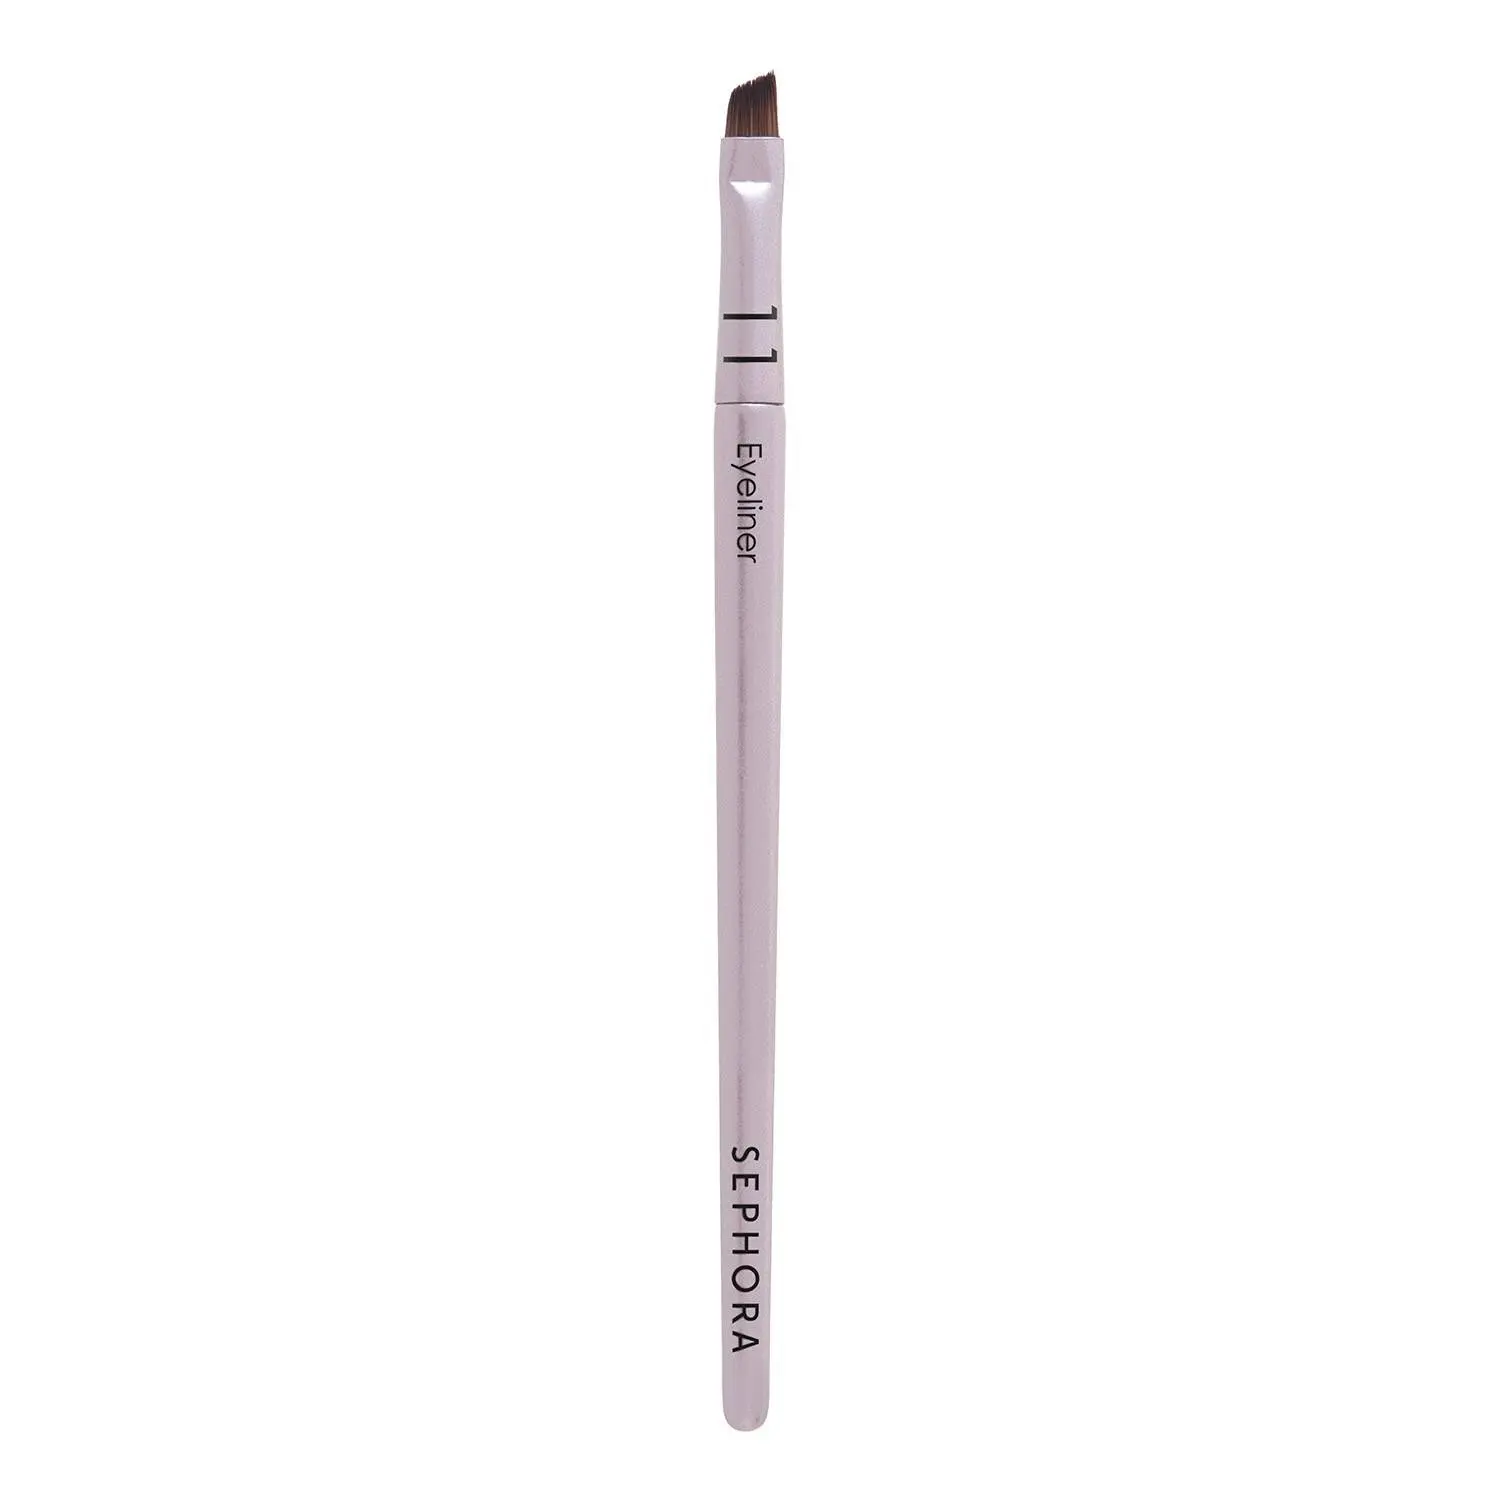 Sephora Collection Eyeliner Brush 11 Discounts and Cashback